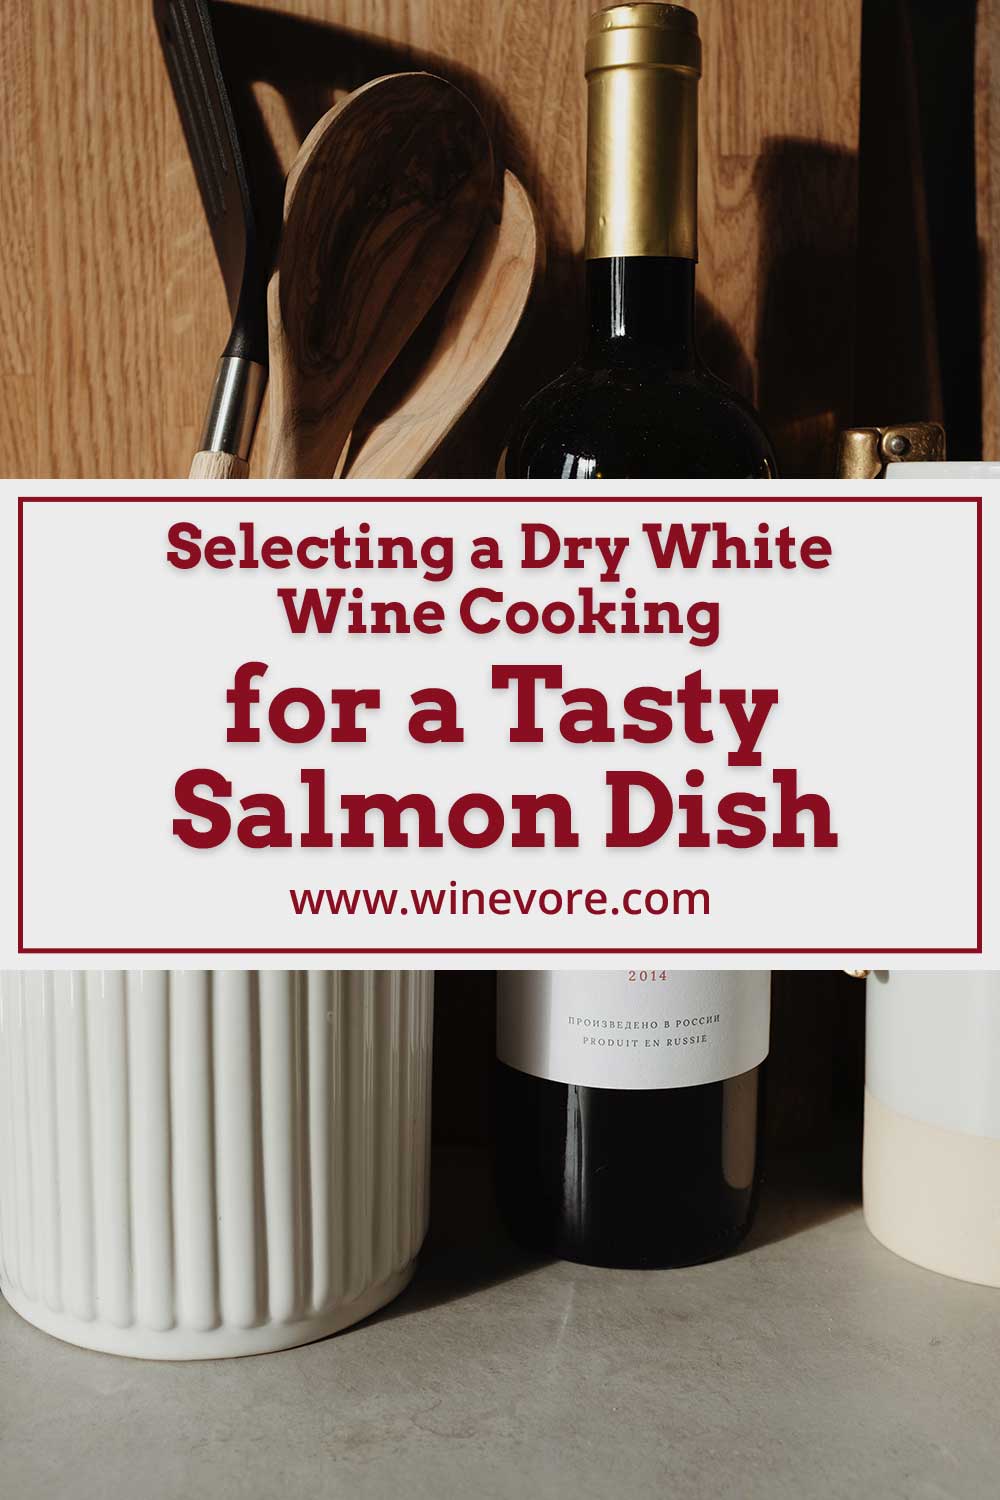 A wine bottle with some kitchen utensils - Selecting a Dry White Wine Cooking for a Tasty Salmon Dish.